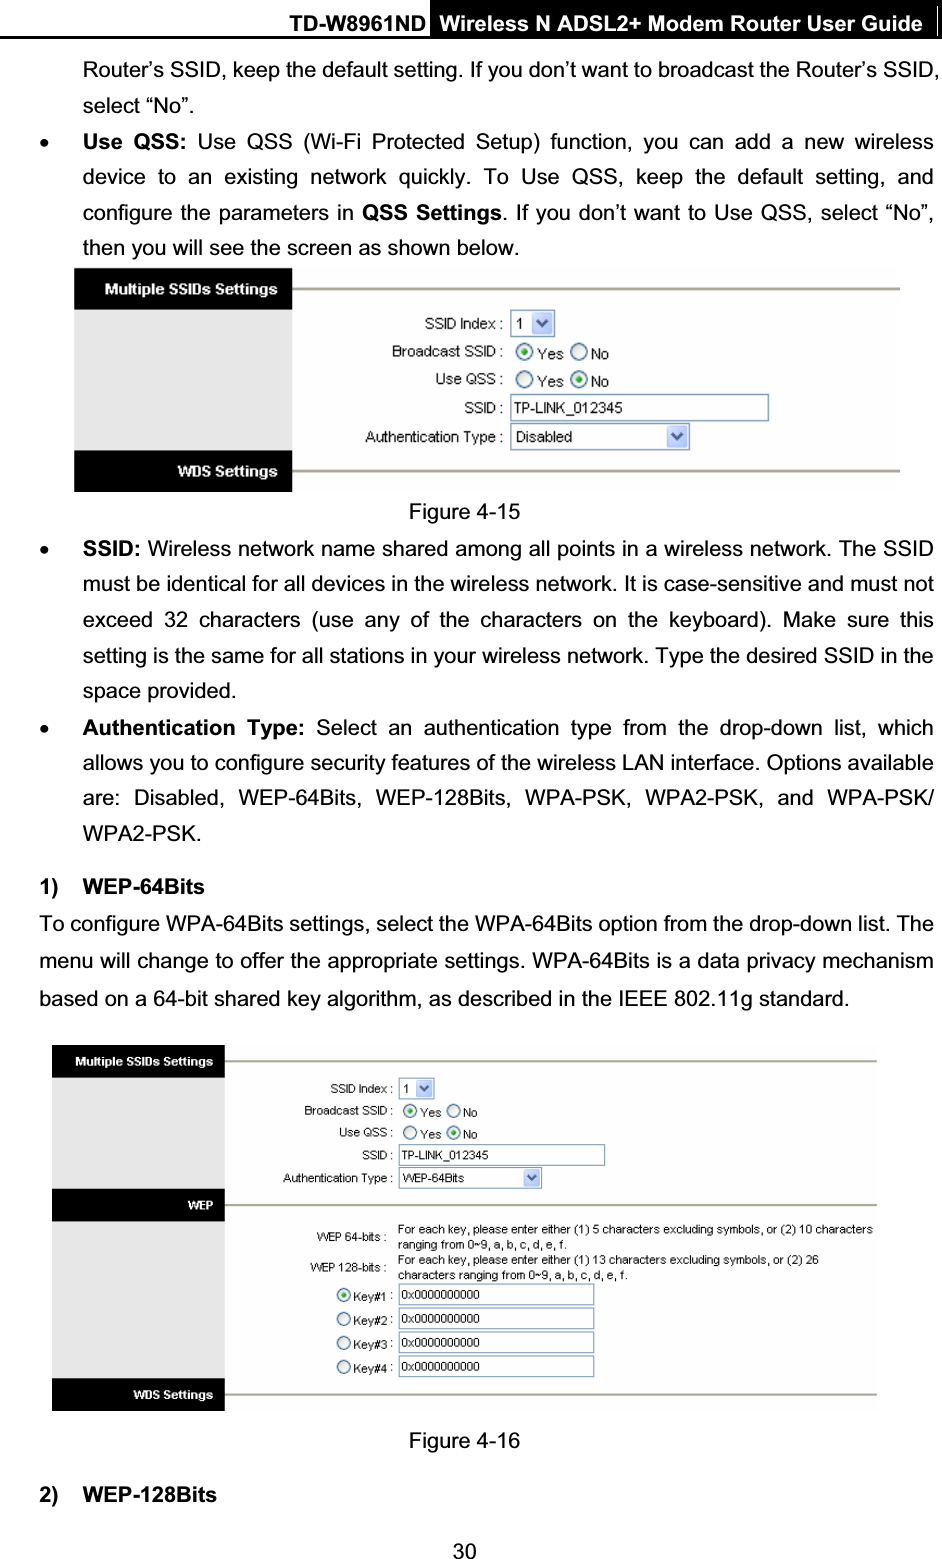 TD-W8961ND Wireless N ADSL2+ Modem Router User Guide30Router’s SSID, keep the default setting. If you don’t want to broadcast the Router’s SSID, select “No”. xUse QSS: Use QSS (Wi-Fi Protected Setup) function, you can add a new wireless device to an existing network quickly. To Use QSS, keep the default setting, and configure the parameters in QSS Settings. If you don’t want to Use QSS, select “No”, then you will see the screen as shown below. Figure 4-15 xSSID: Wireless network name shared among all points in a wireless network. The SSID must be identical for all devices in the wireless network. It is case-sensitive and must not exceed 32 characters (use any of the characters on the keyboard). Make sure this setting is the same for all stations in your wireless network. Type the desired SSID in the space provided. xAuthentication Type: Select an authentication type from the drop-down list, which allows you to configure security features of the wireless LAN interface. Options available are: Disabled, WEP-64Bits, WEP-128Bits, WPA-PSK, WPA2-PSK, and WPA-PSK/ WPA2-PSK.  1) WEP-64Bits To configure WPA-64Bits settings, select the WPA-64Bits option from the drop-down list. The menu will change to offer the appropriate settings. WPA-64Bits is a data privacy mechanism based on a 64-bit shared key algorithm, as described in the IEEE 802.11g standard. Figure 4-16 2) WEP-128Bits 